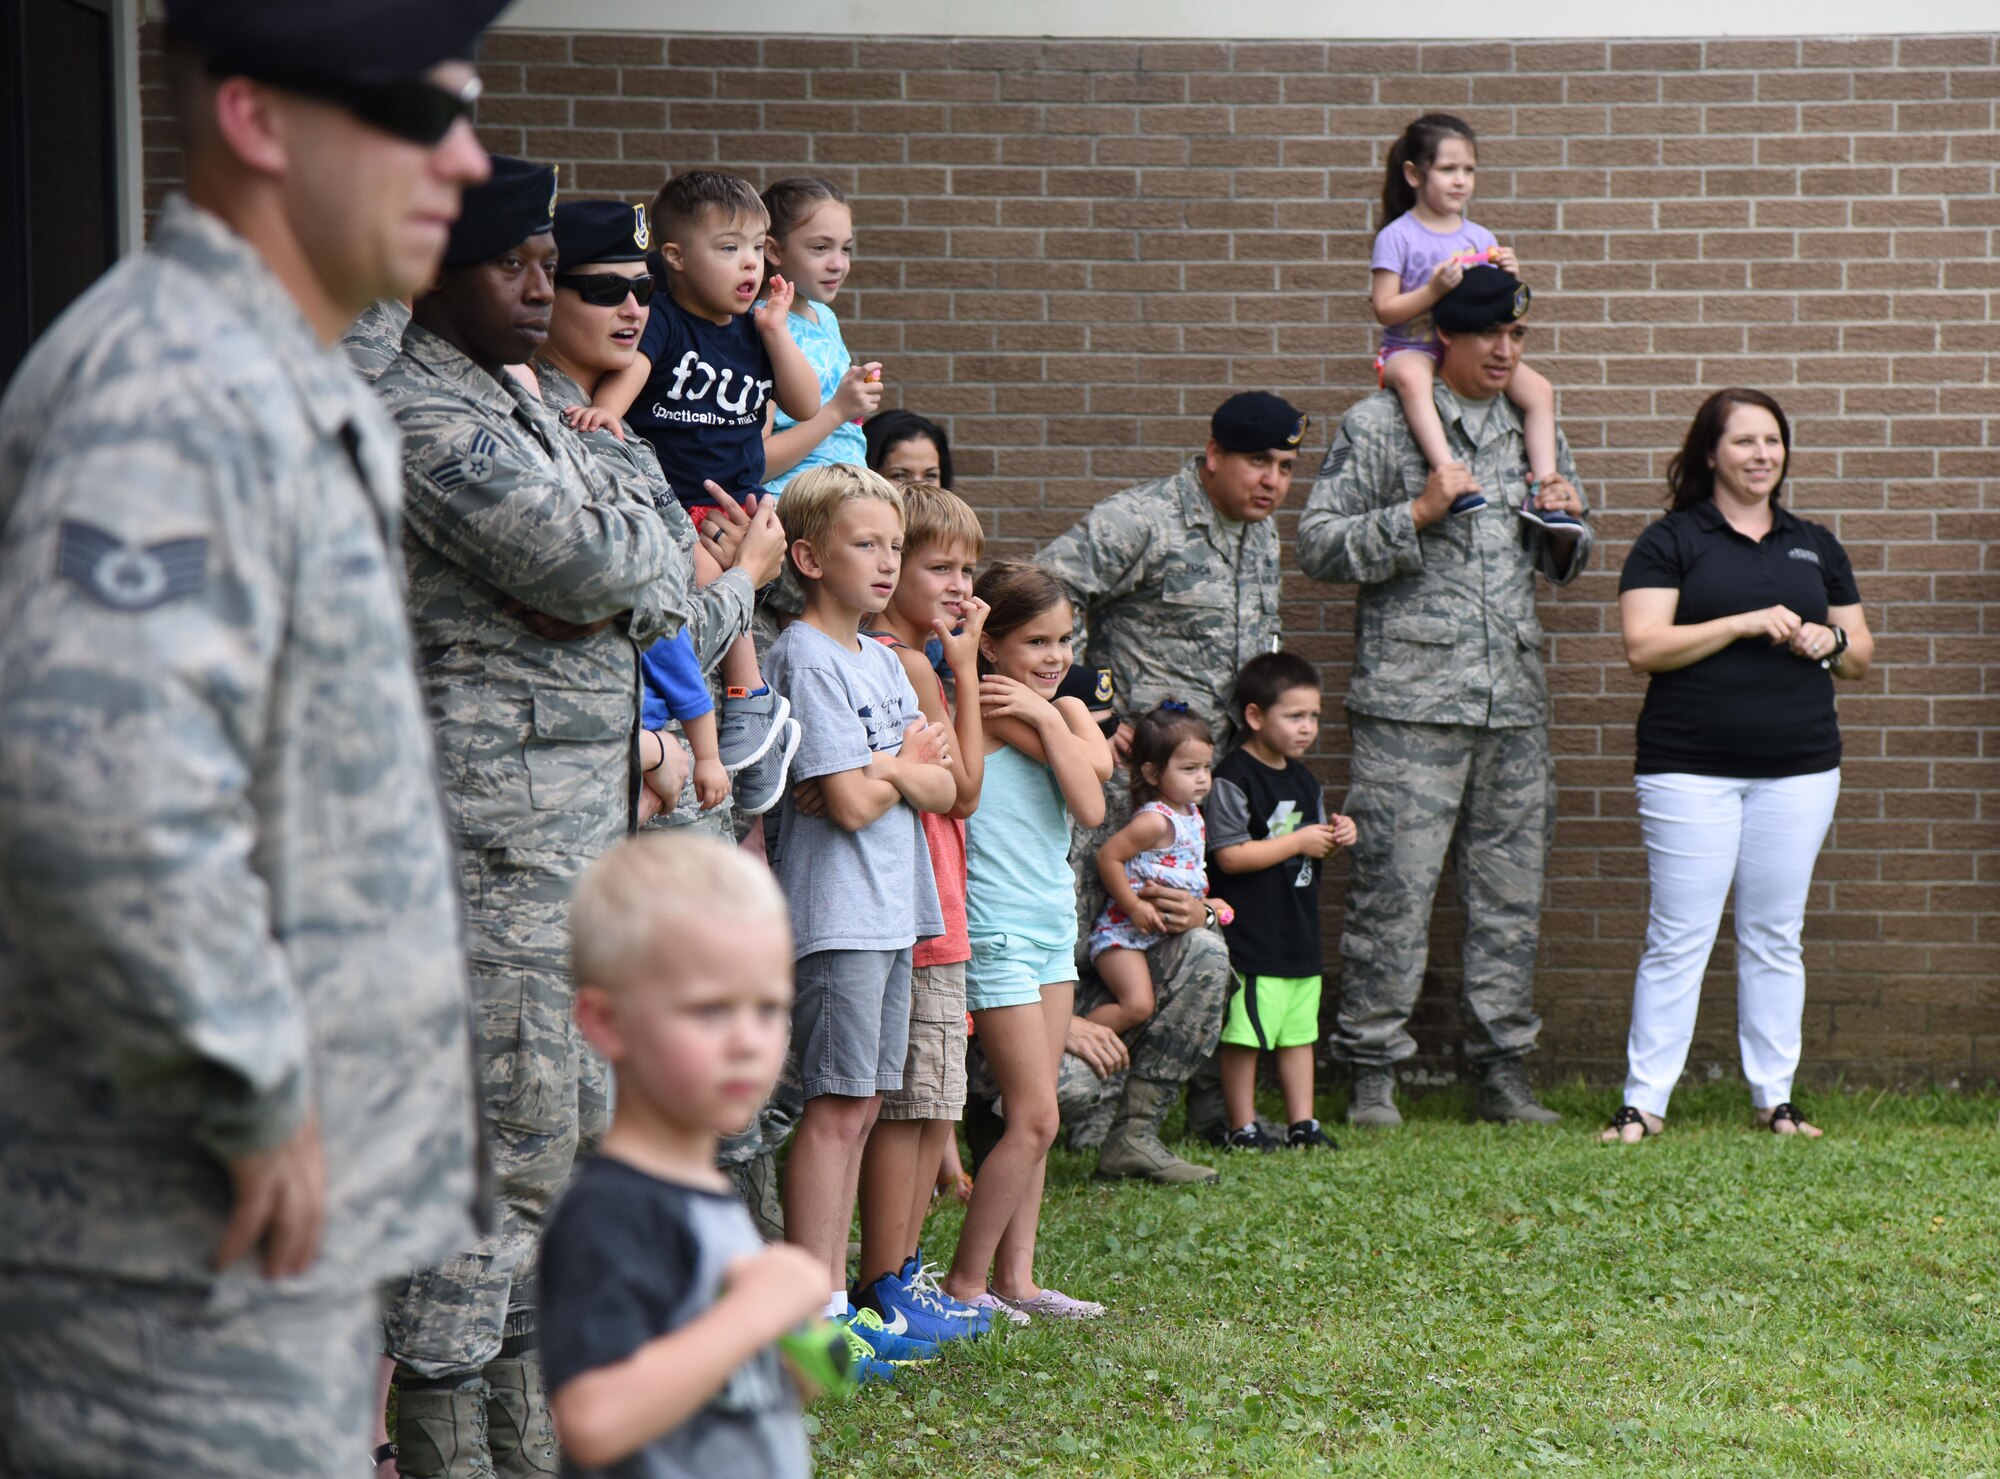 Member of the 81st Security Forces Squadron and their families attend a military working dog demonstration during a family ice cream social at the 81st SFS building July 27, 2017, on Keesler Air Force Base, Miss. The event, hosted by the 81st SFS Defenders Council and Key Spouses, also consisted of a combat arms weapons display and ice cream. (U.S. Air Force photo by Kemberly Groue)